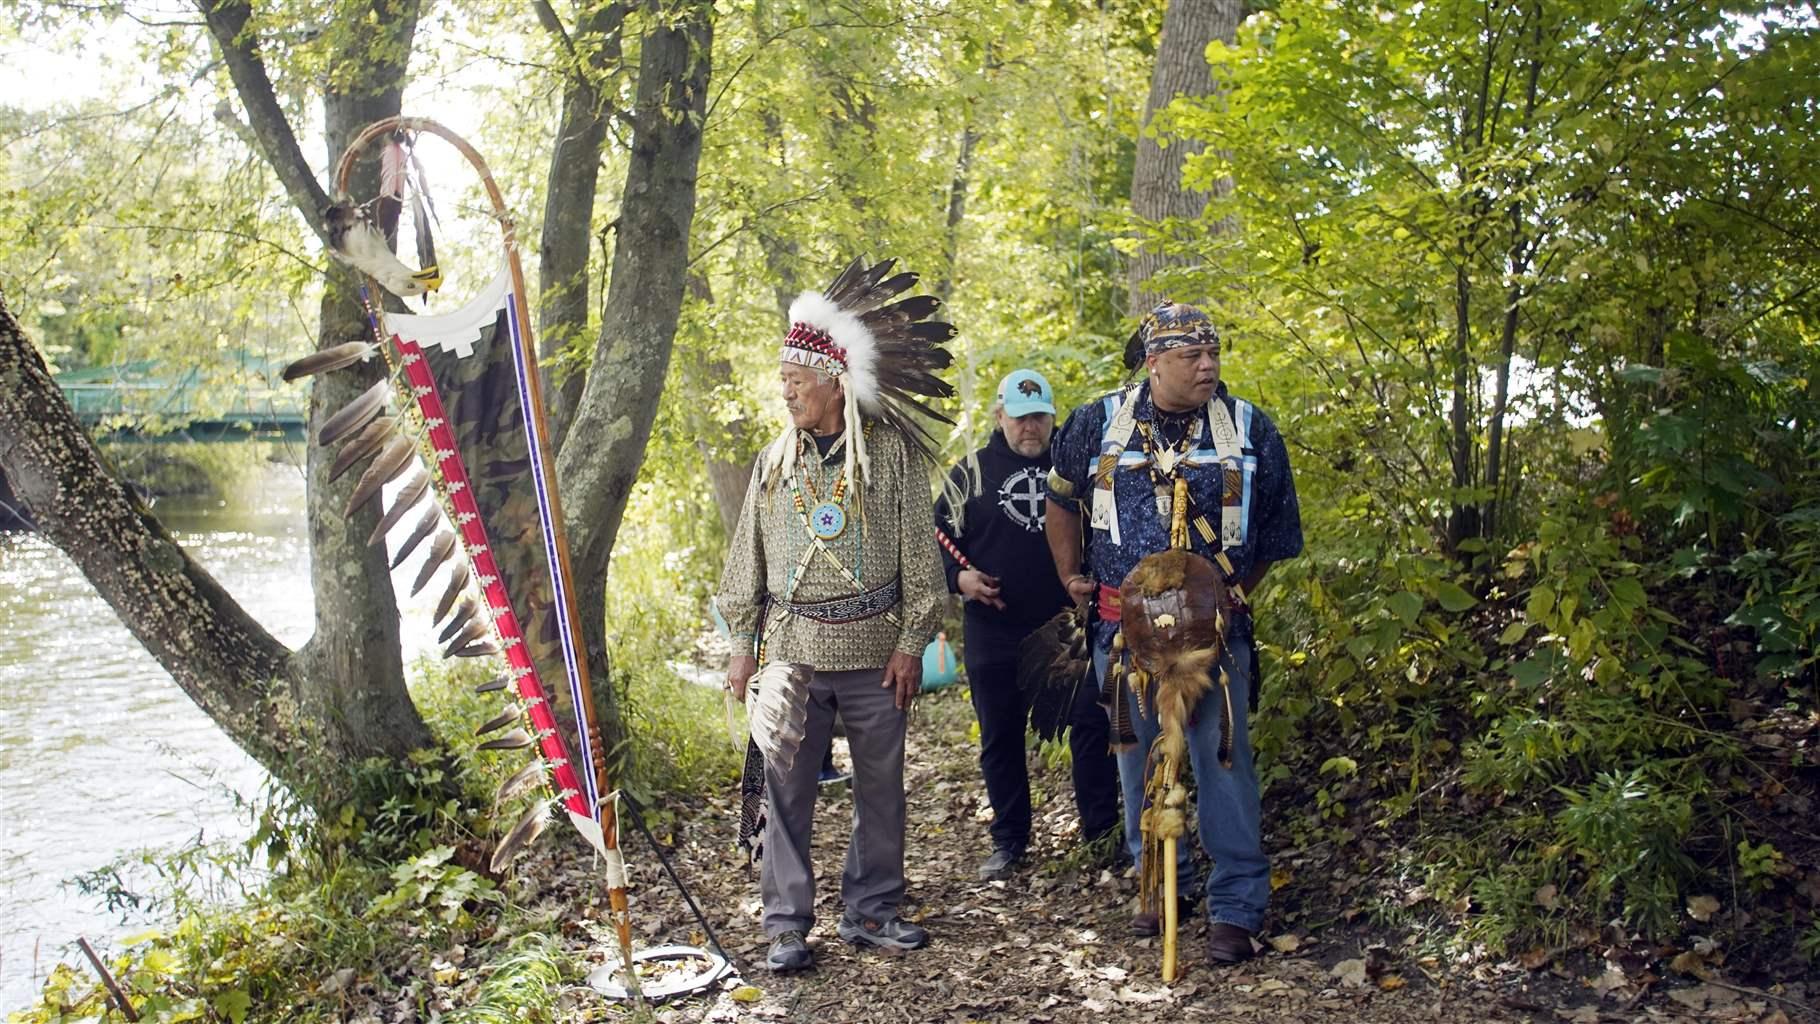 Jake Singer and Shawn Stevens prepare to make offerings to the Housatonic River for the celebration of Indigenous Peoples Day in Great Barrington, Mass., on Monday, Oct. 11, 2021.